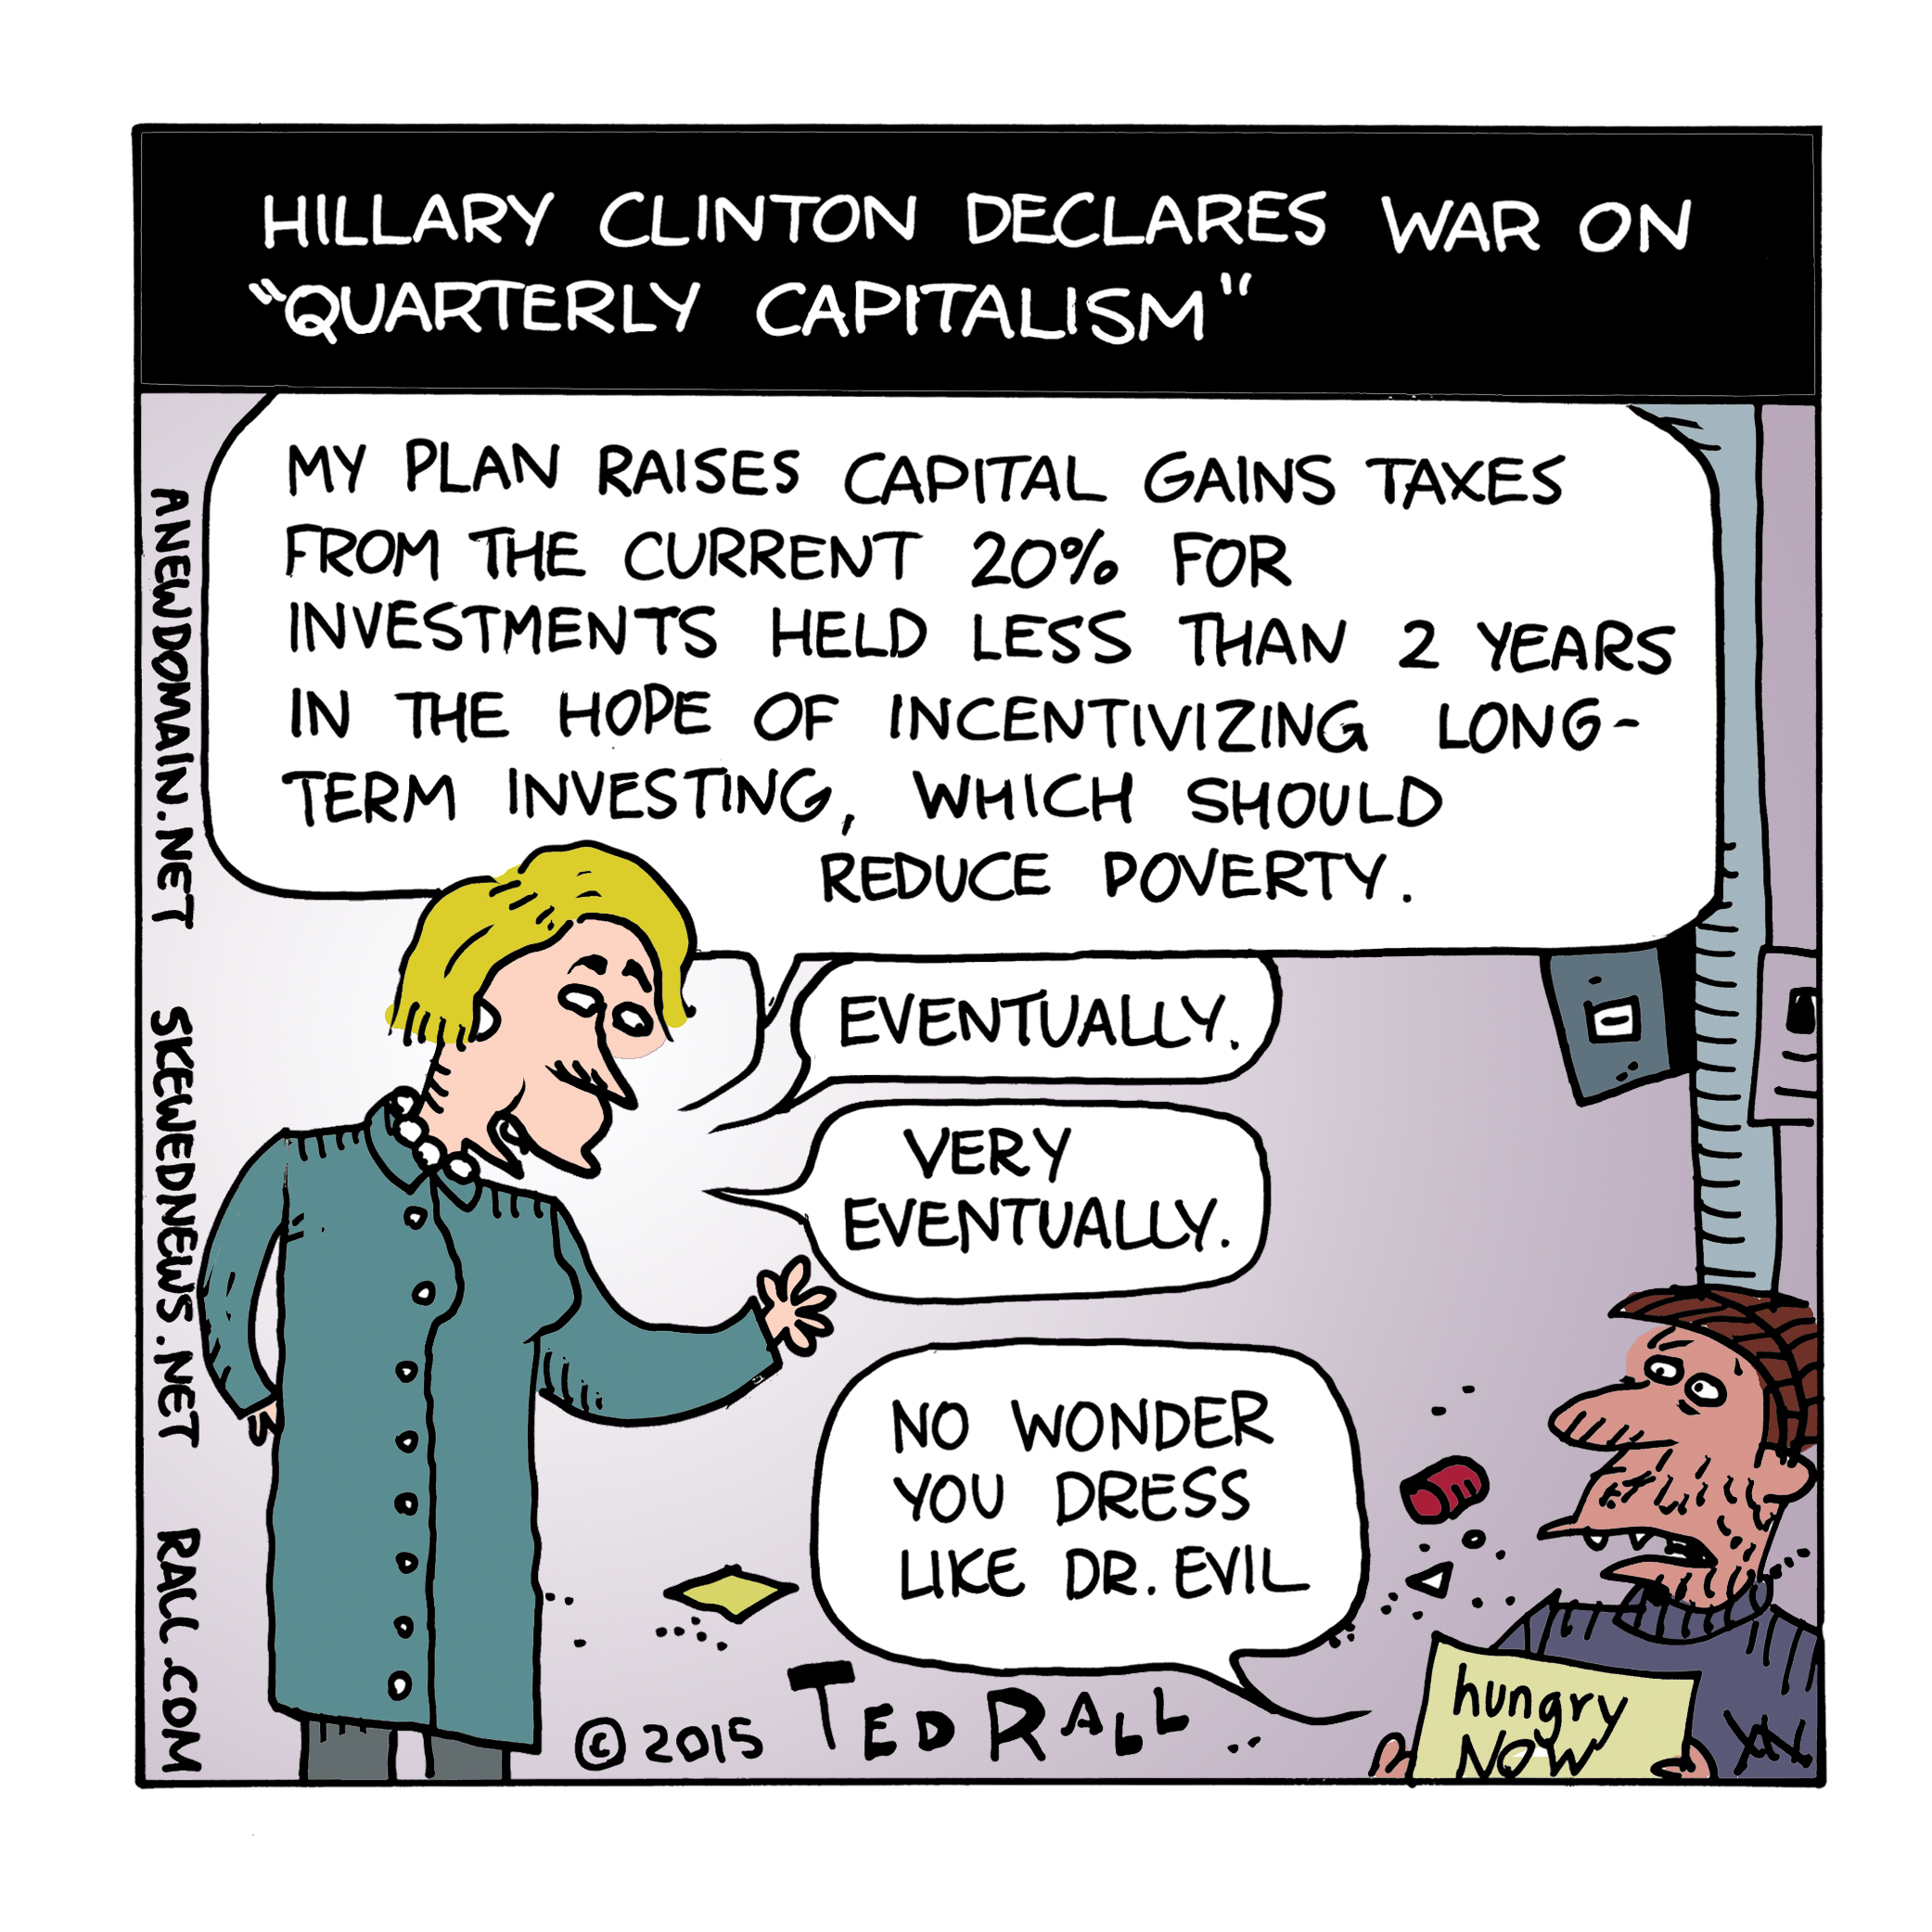 Hillary Clinton says the problem with capitalism is the emphasis on quarterly profits. She's right, but reforms won't help people who are miserable right now.